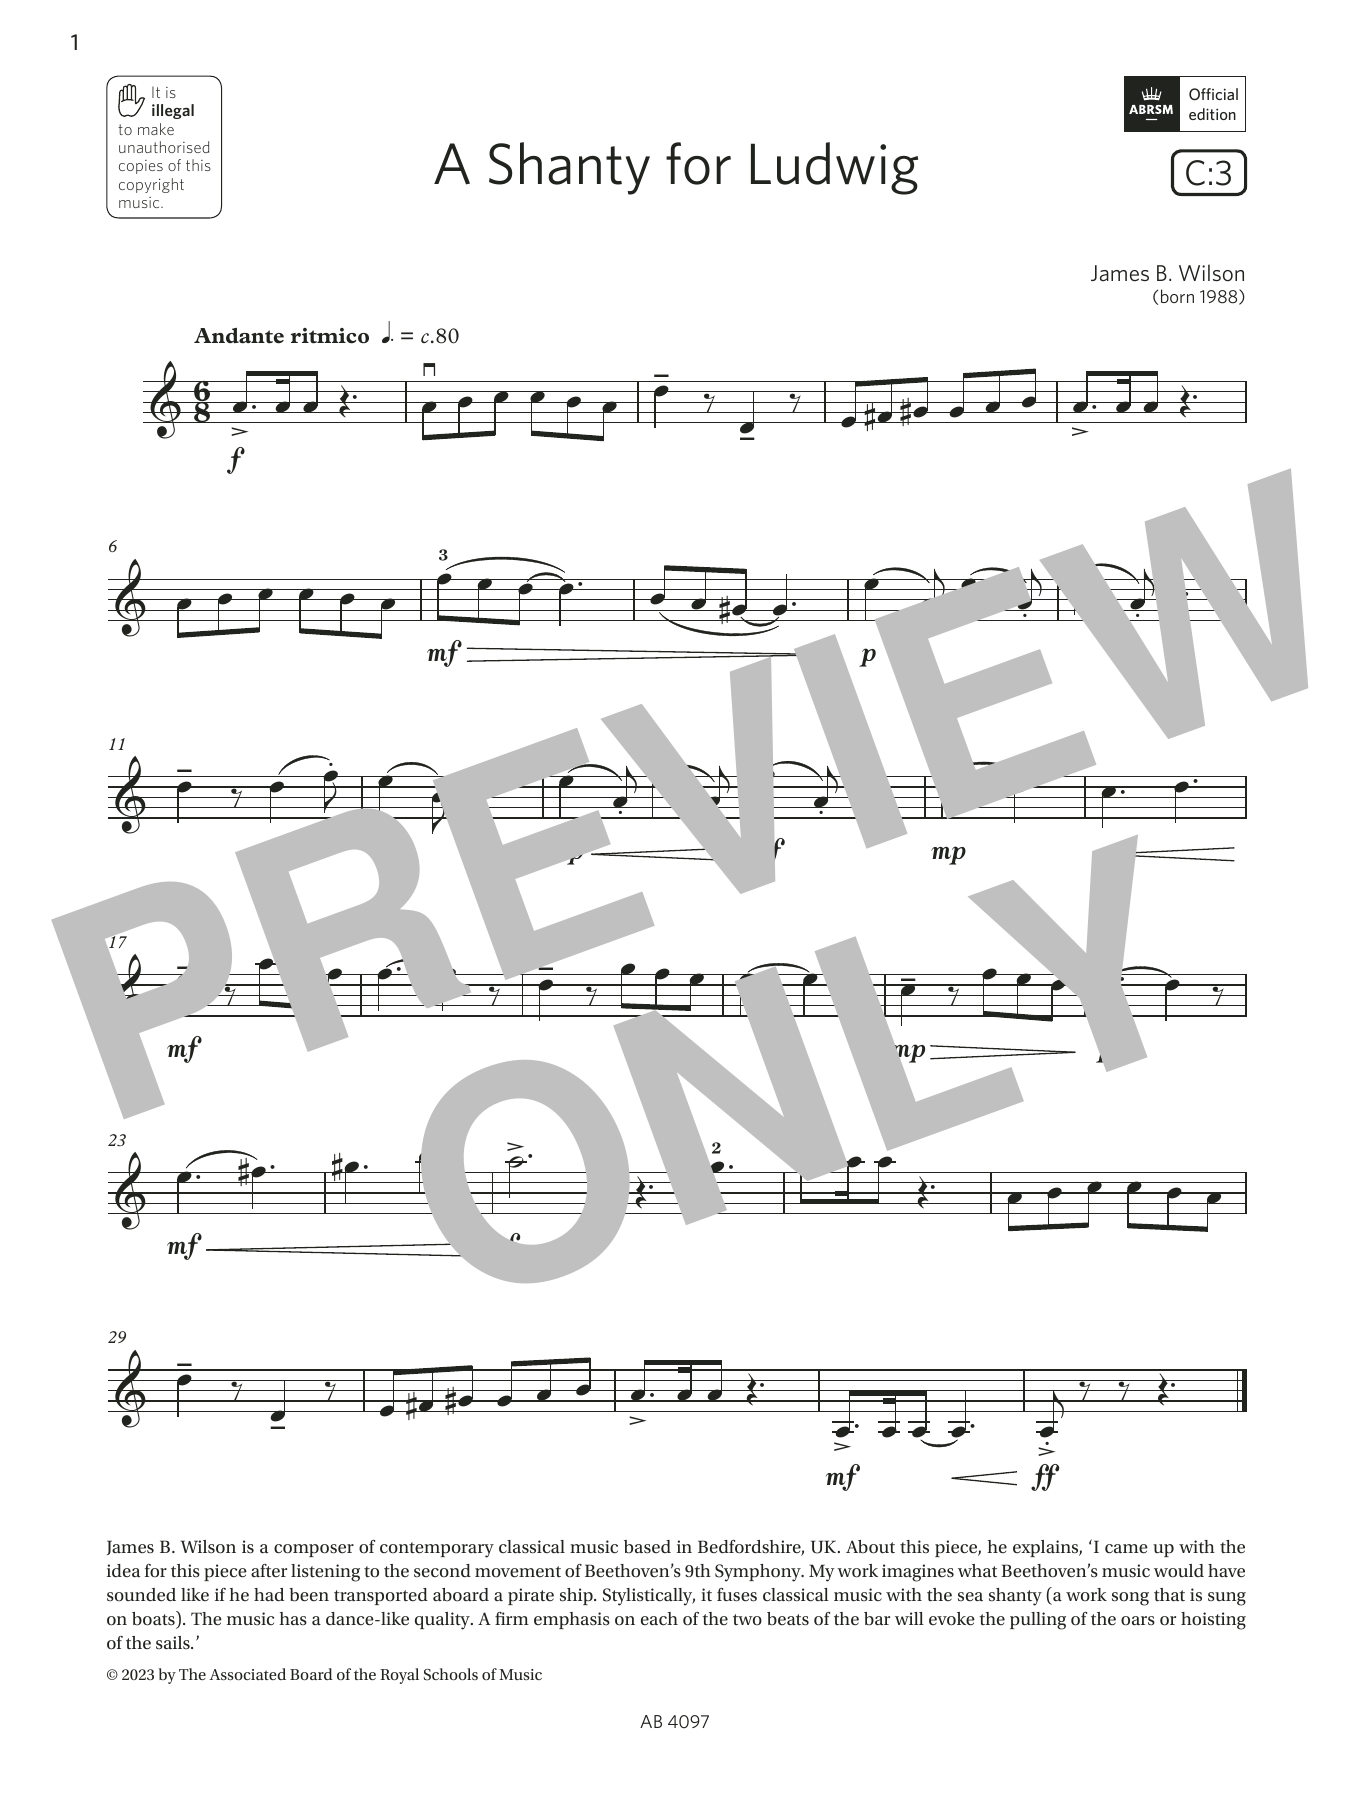 Download James B. Wilson A Shanty for Ludwig (Grade 3, C3, from Sheet Music